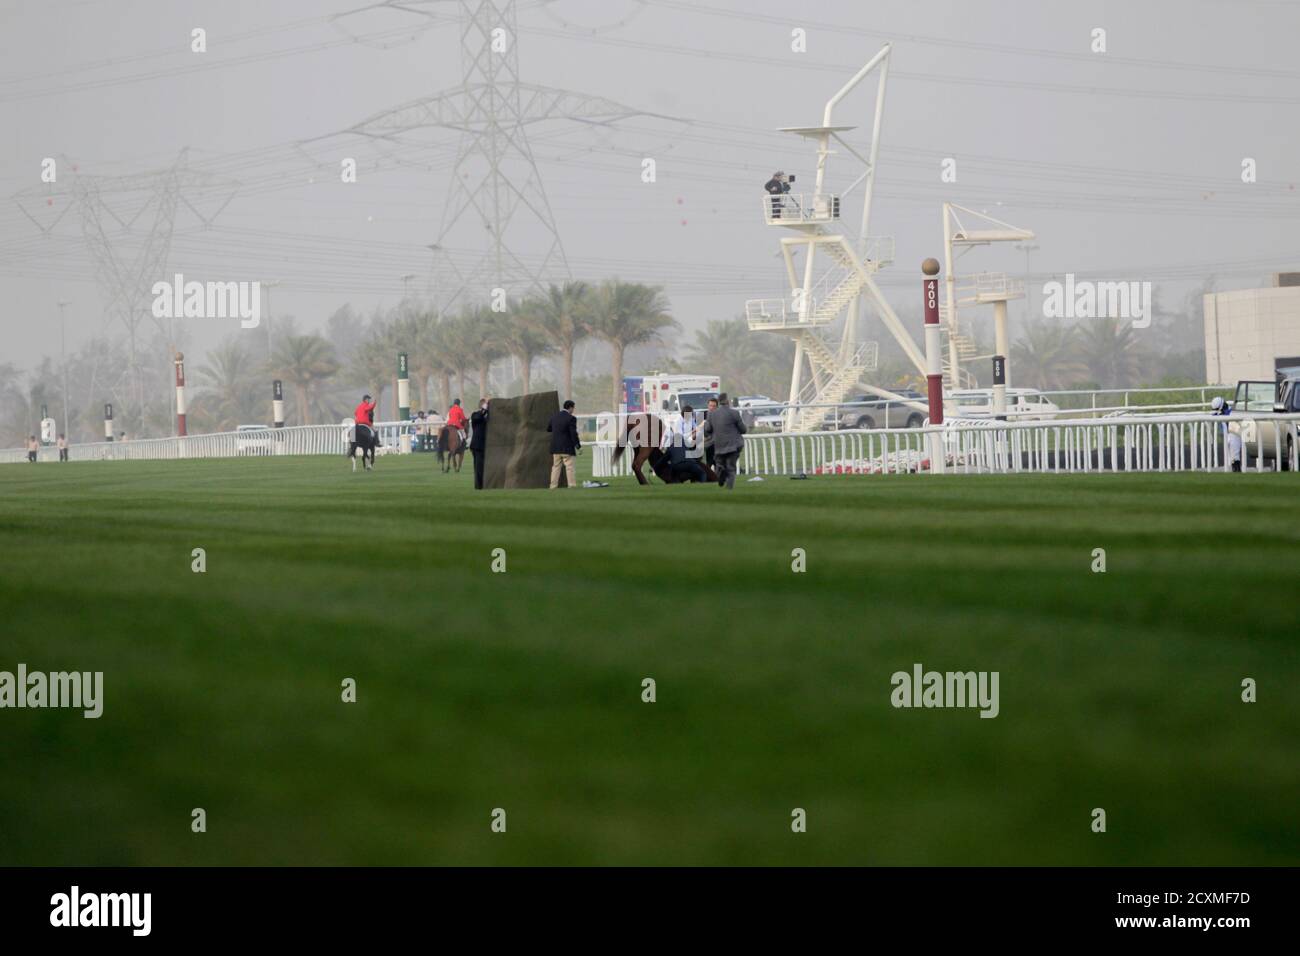 Fox Hunt of Ireland, ridden by Silvestre De Sousa, falls as it breaks its leg while competing in the third race during the 17th Dubai World Cup at the Meydan racecourse in Dubai March 31, 2012. The Dubai World Cup, with a cash prize of $10 million, is horse racing's richest race. REUTERS/Caren Firouz (UNITED ARAB EMIRATES - Tags: SPORT HORSE RACING) Stock Photo